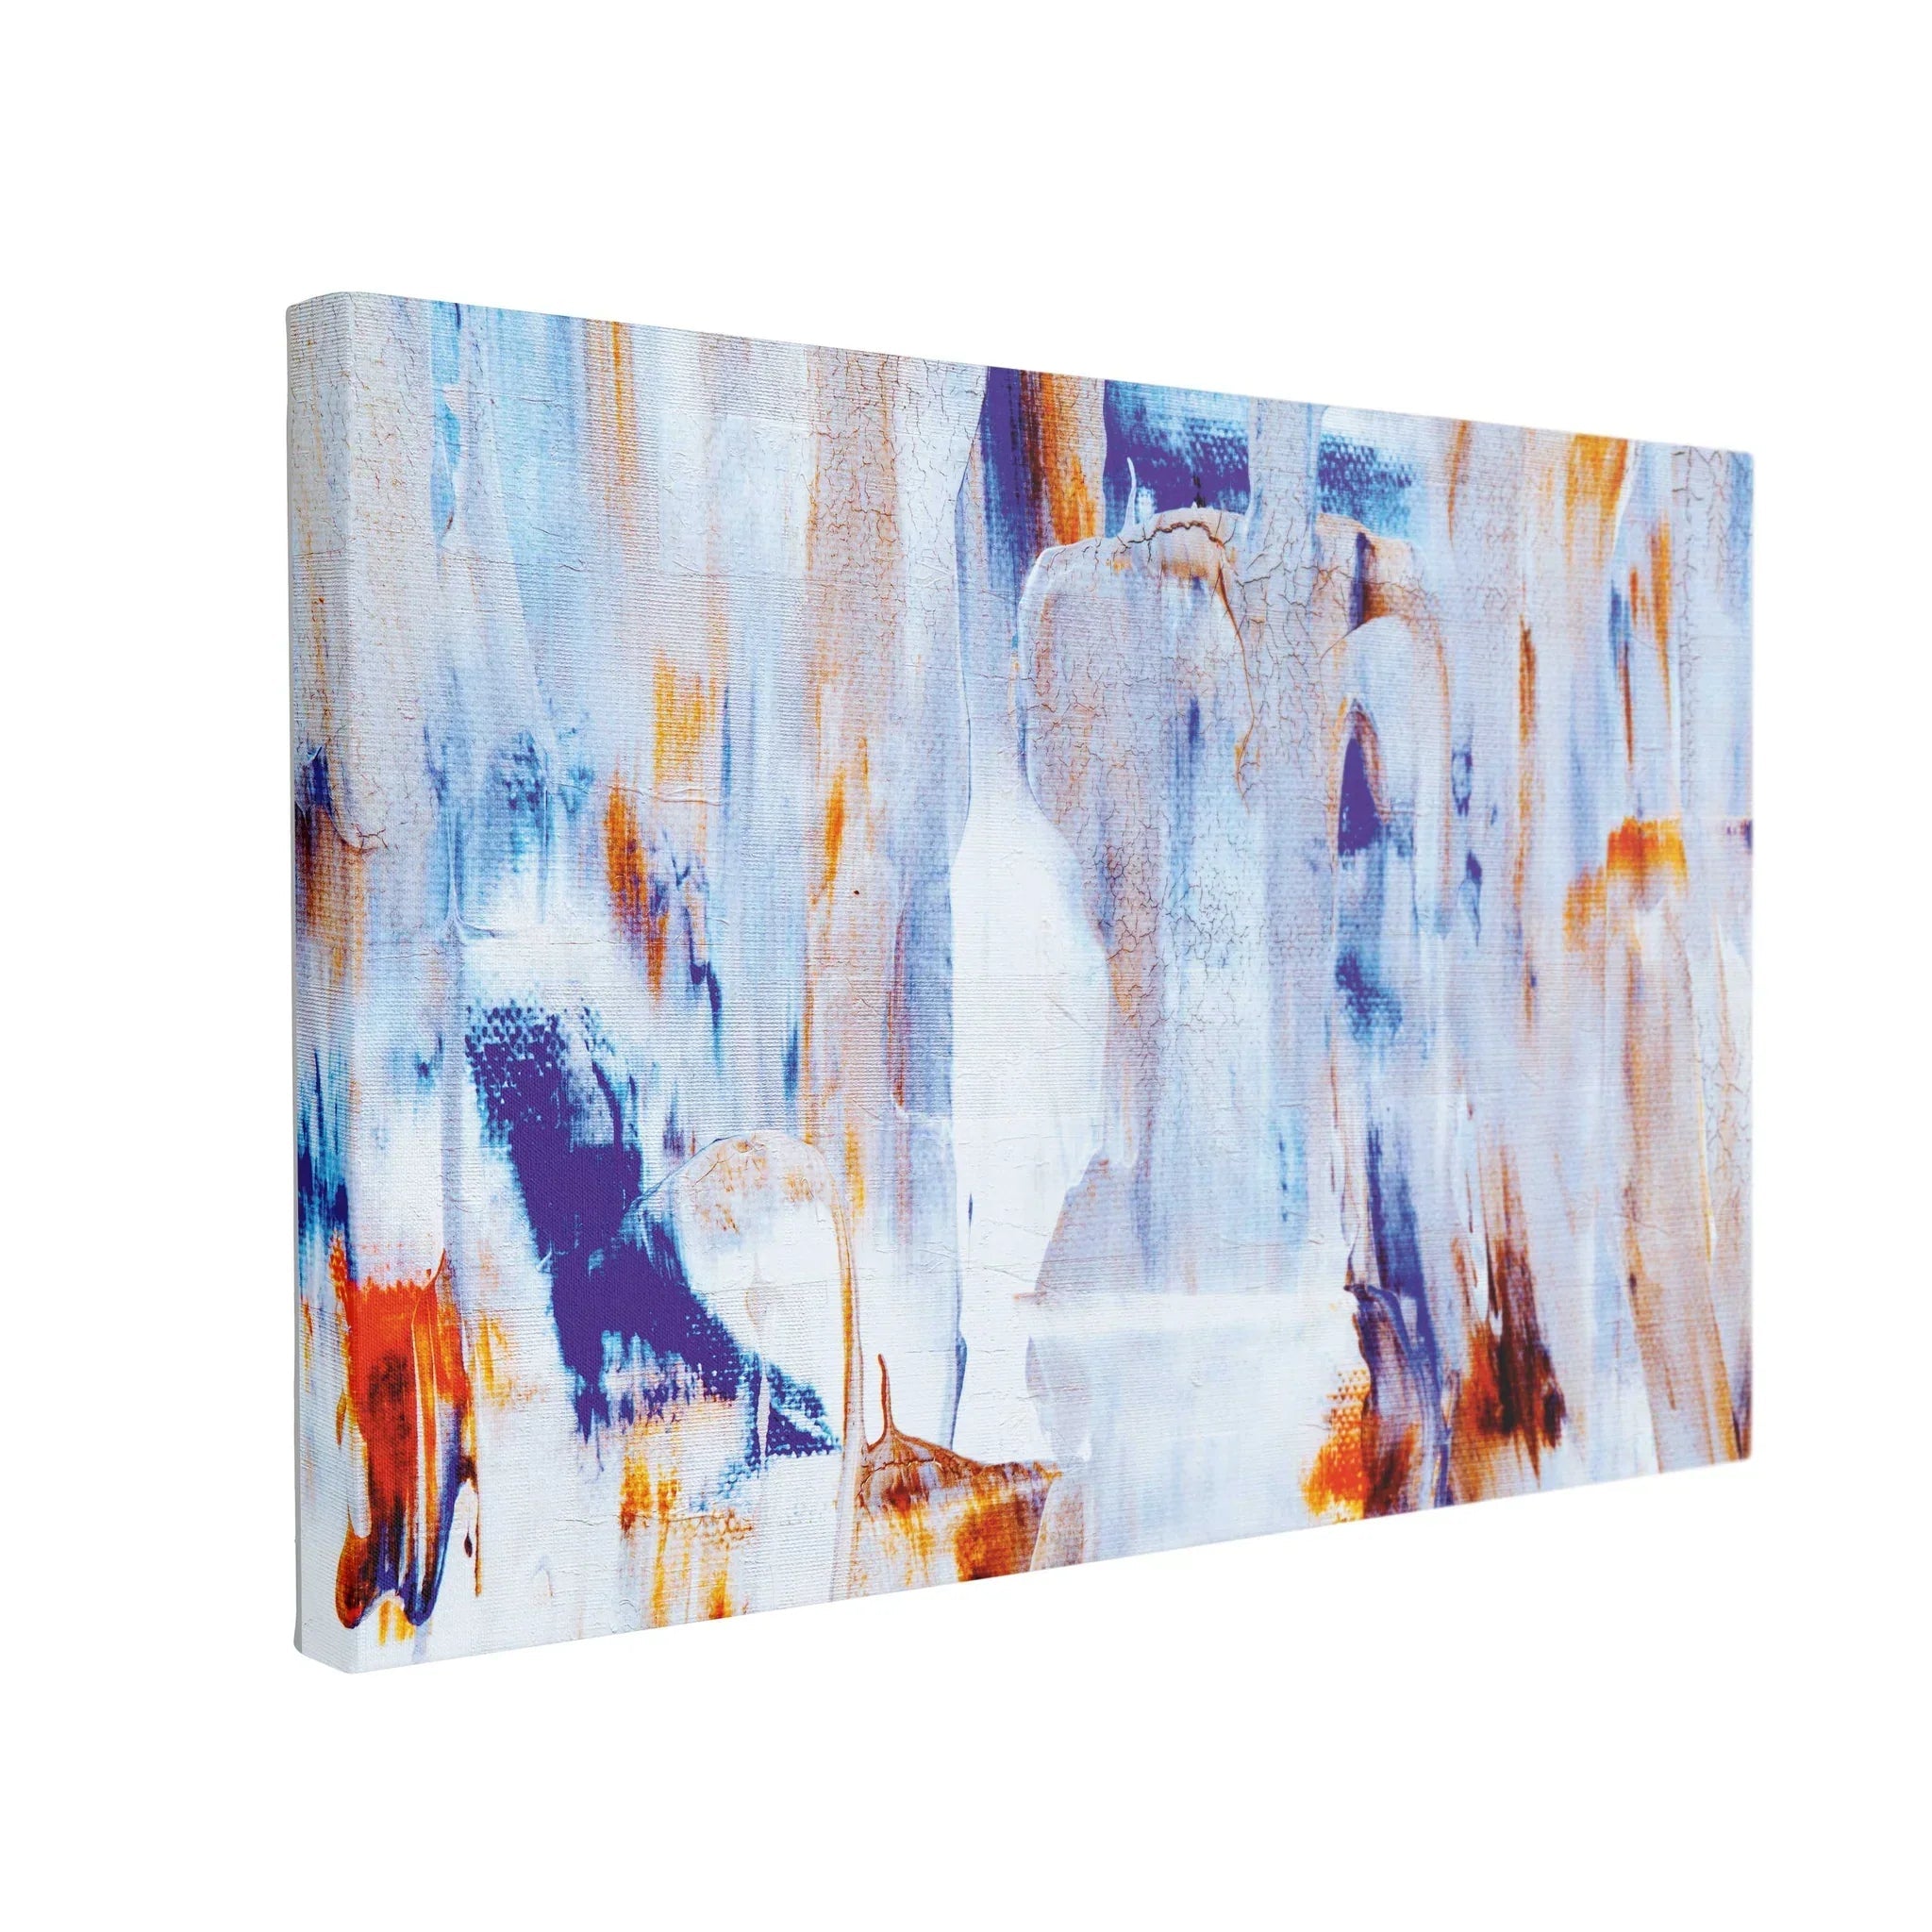 Tablou Canvas Abstract Blue - clevny.ro